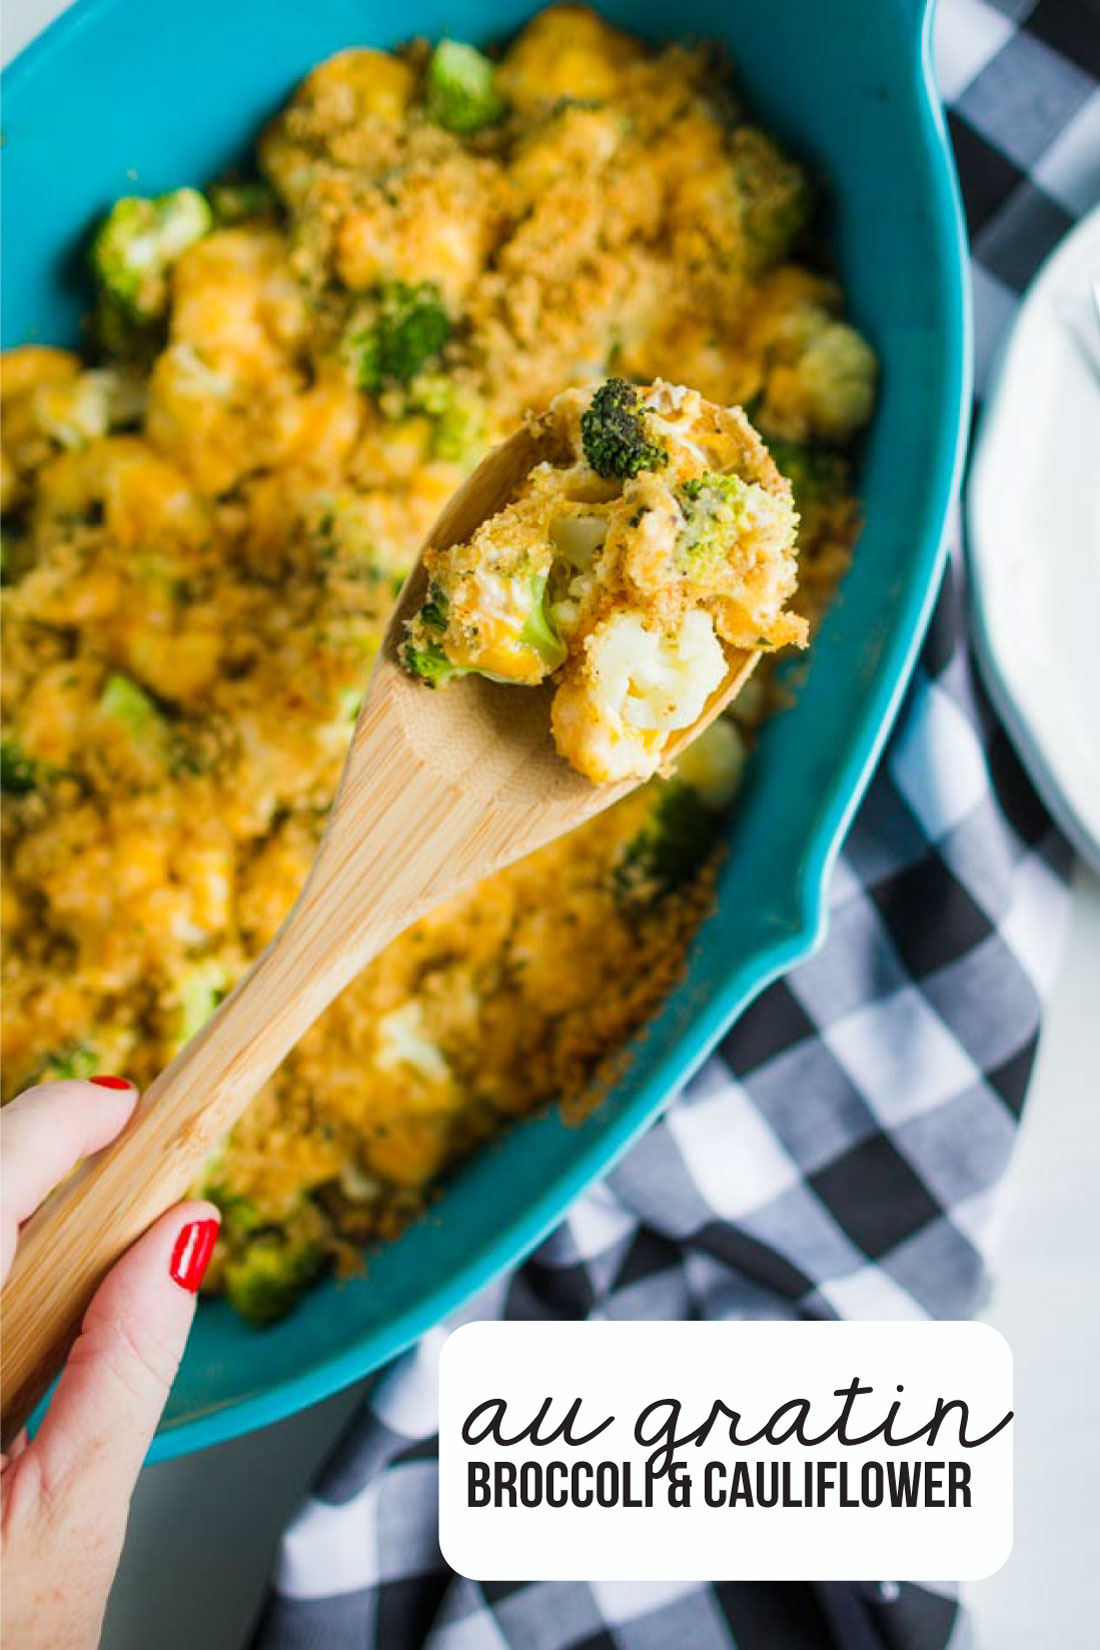 Food: Au Gratin Broccoli and Cauliflower - make this delicious side dish to go with any dinner! from www.thirtyhandmadedays.com